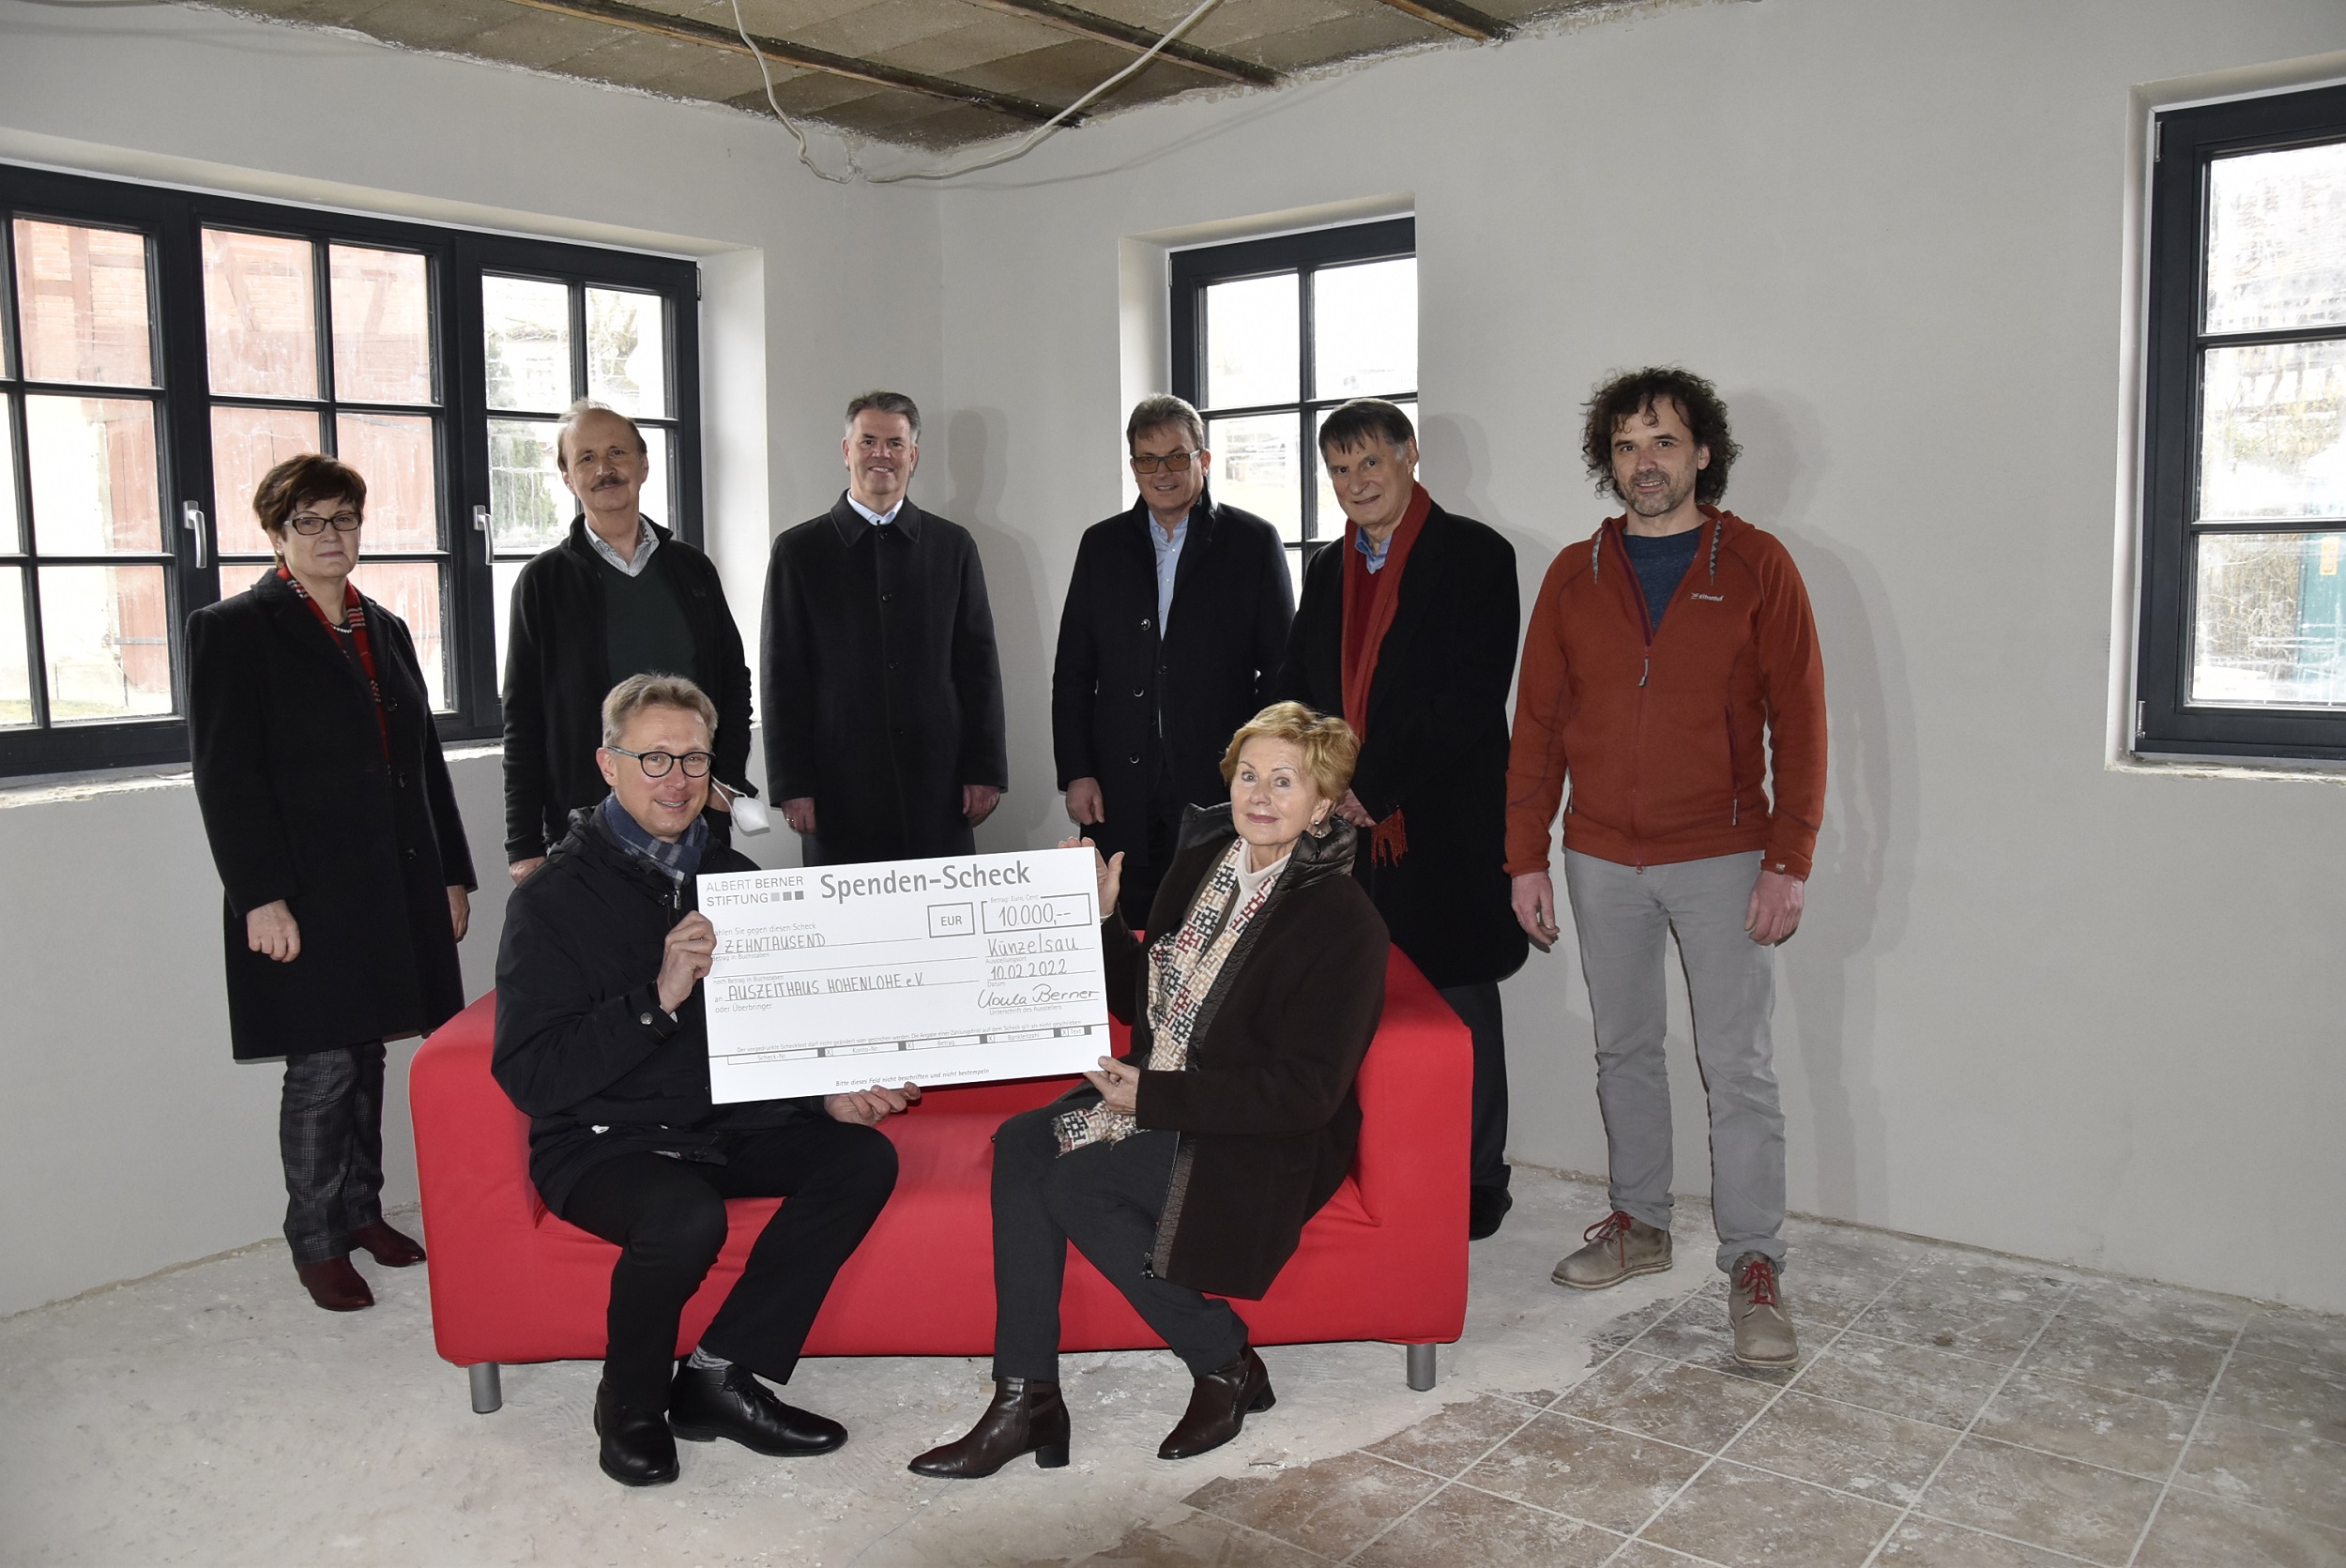 Time out instead of downtime: Generous donation supports new help facility for burnoutprone people Berner Group